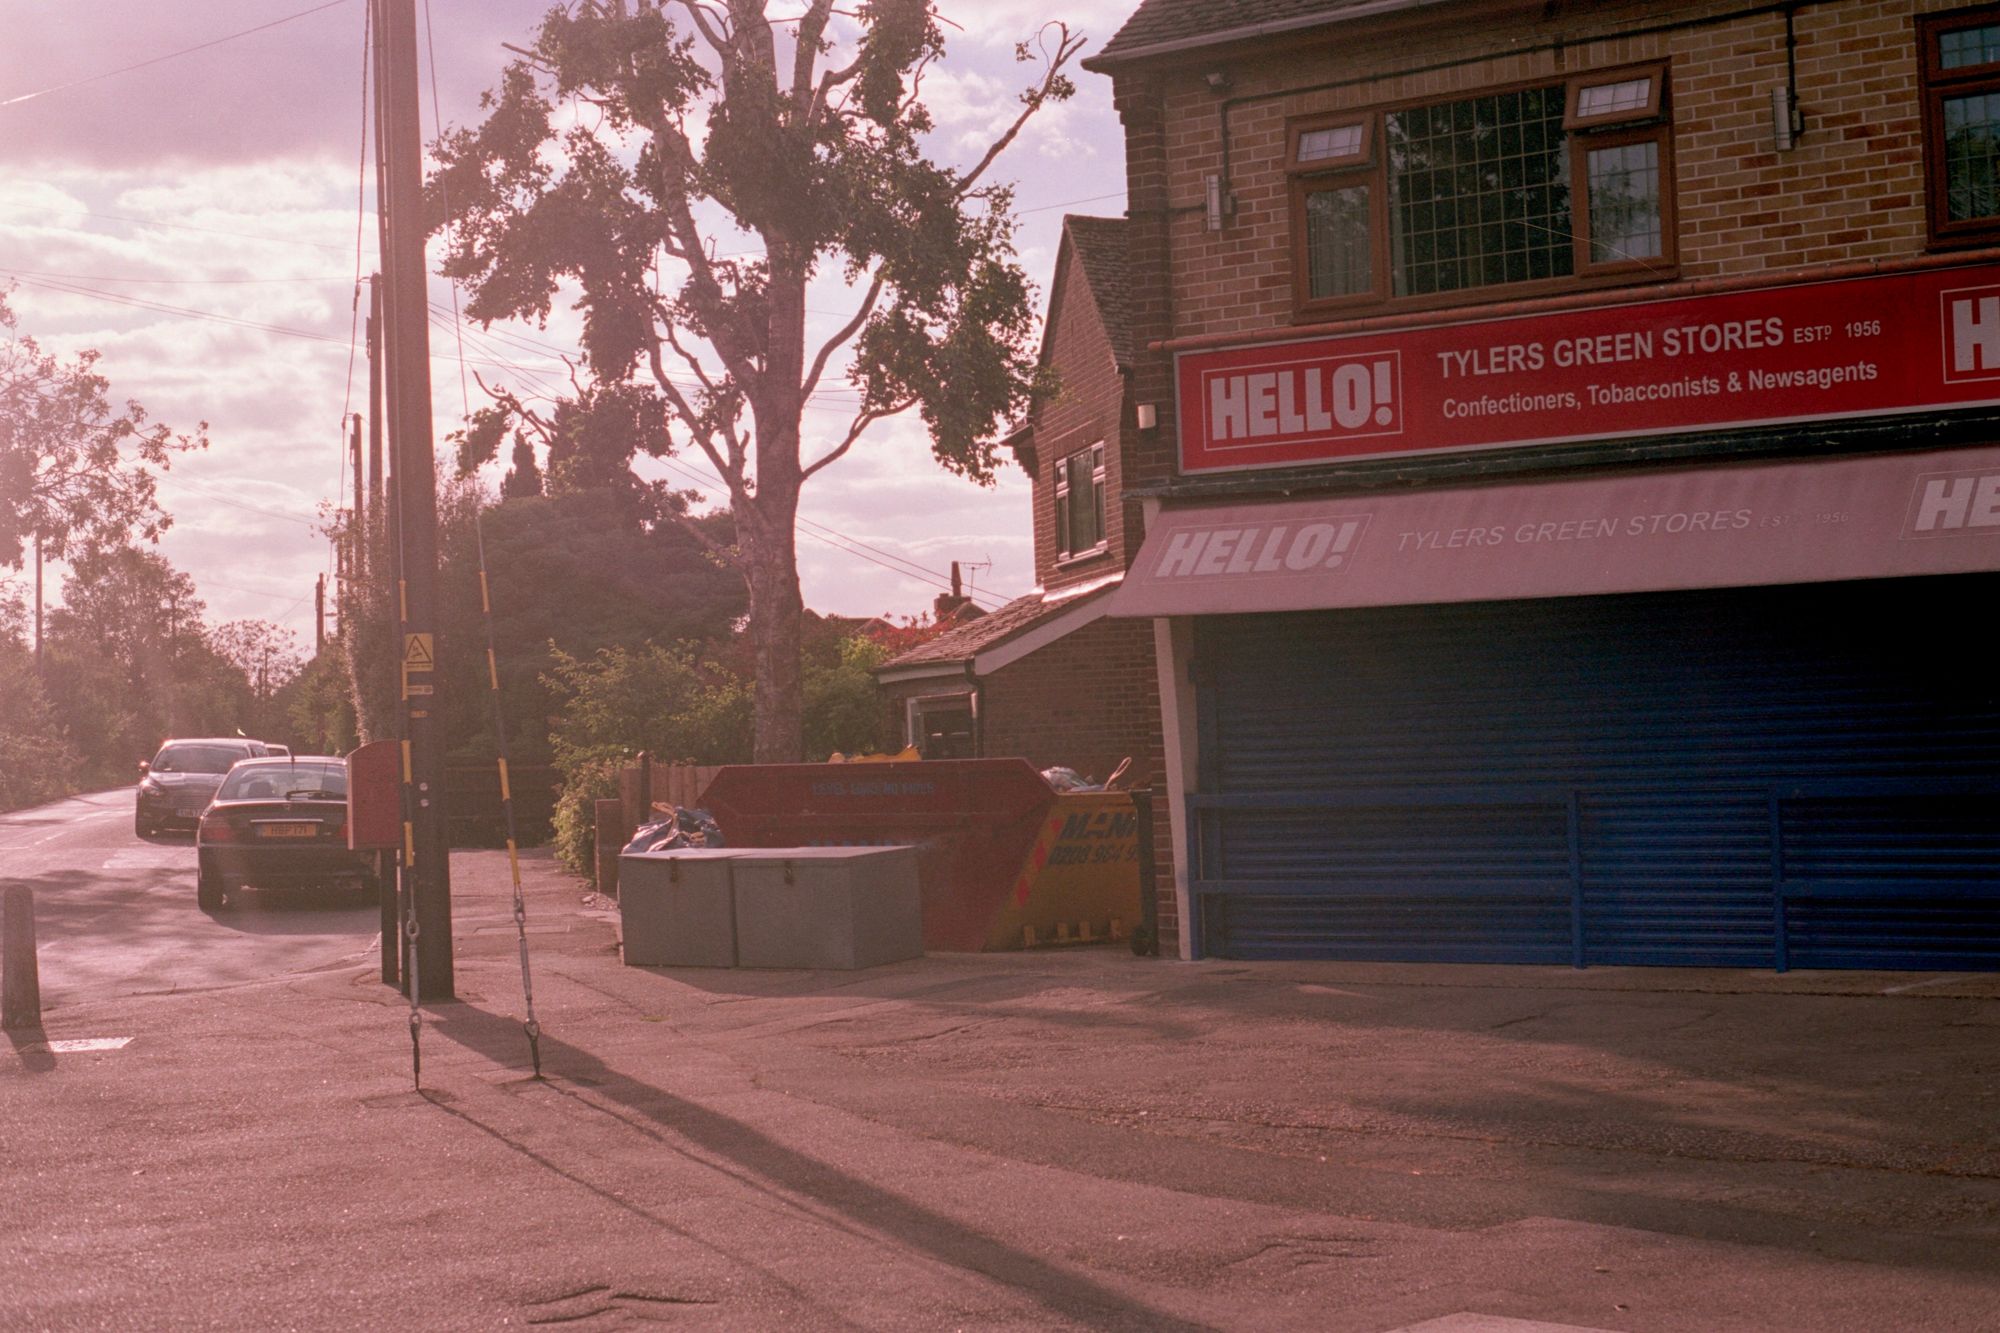 At sunset, A corner shop with its shutters closed: "Tylers Green Stores, established 1956, confectioners, tobacconists & newsagents." The logo of HELLO! magazine appears ton the shop frontage and the faded red awning. There's a telegraph pole and a skip.